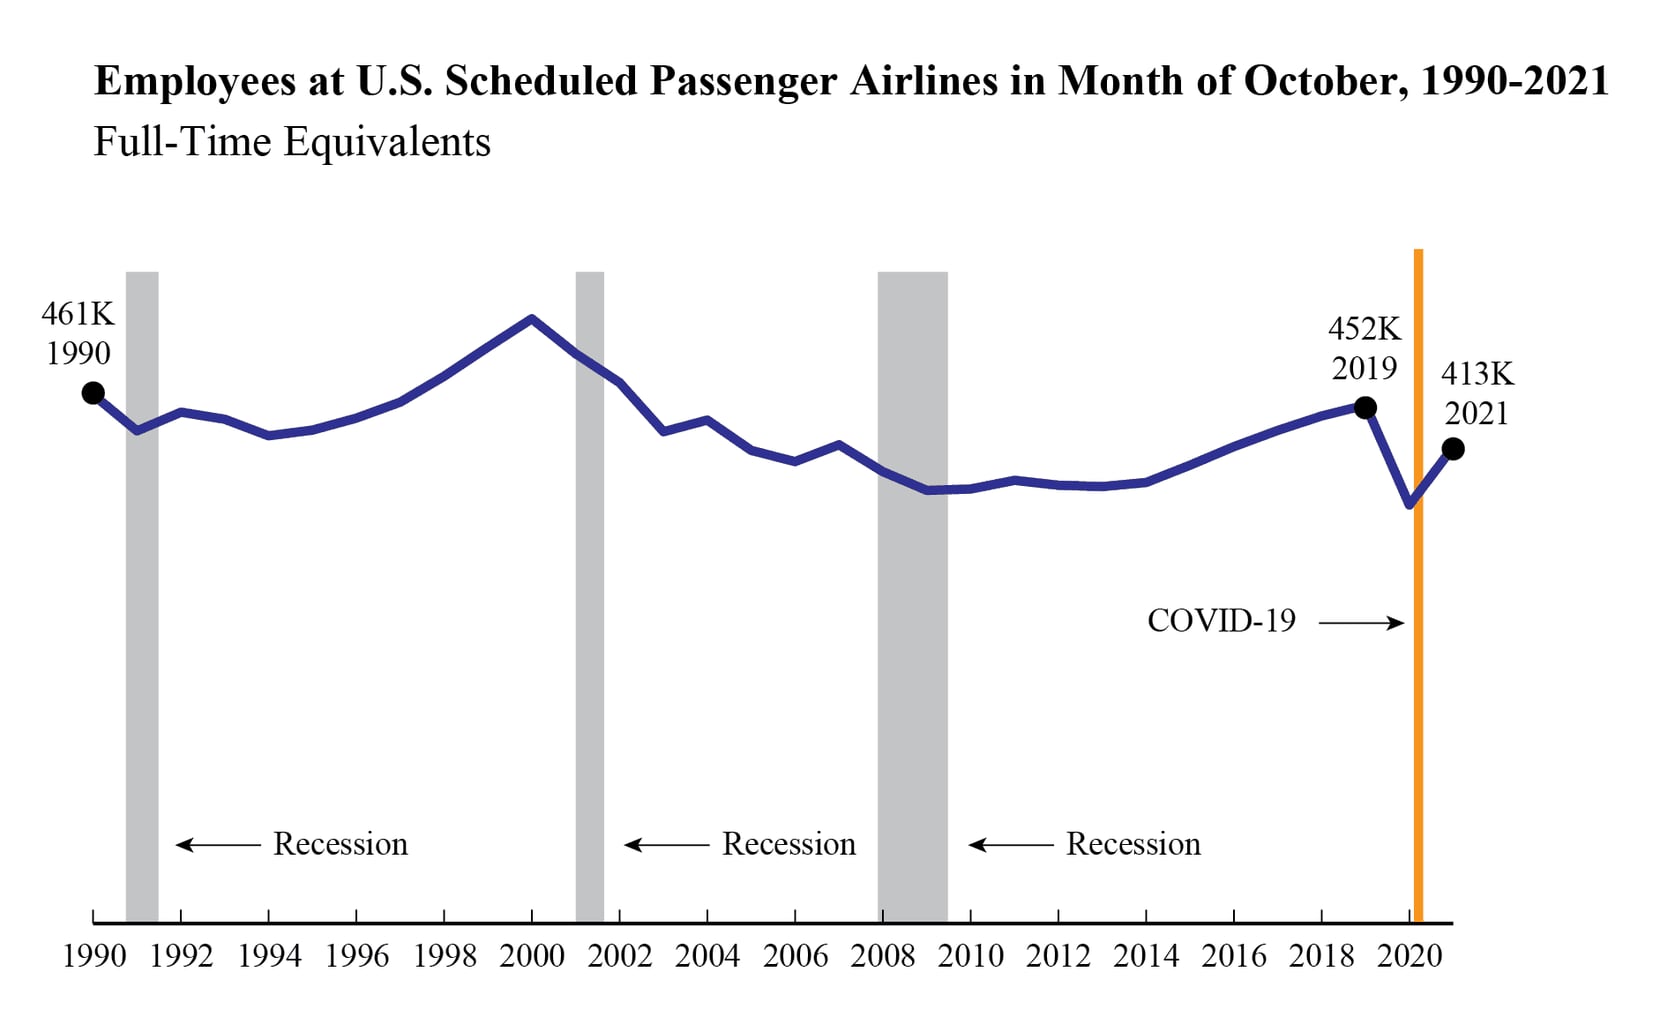 Employment at U.S. passenger airlines remained well below pre-pandemic levels in October.